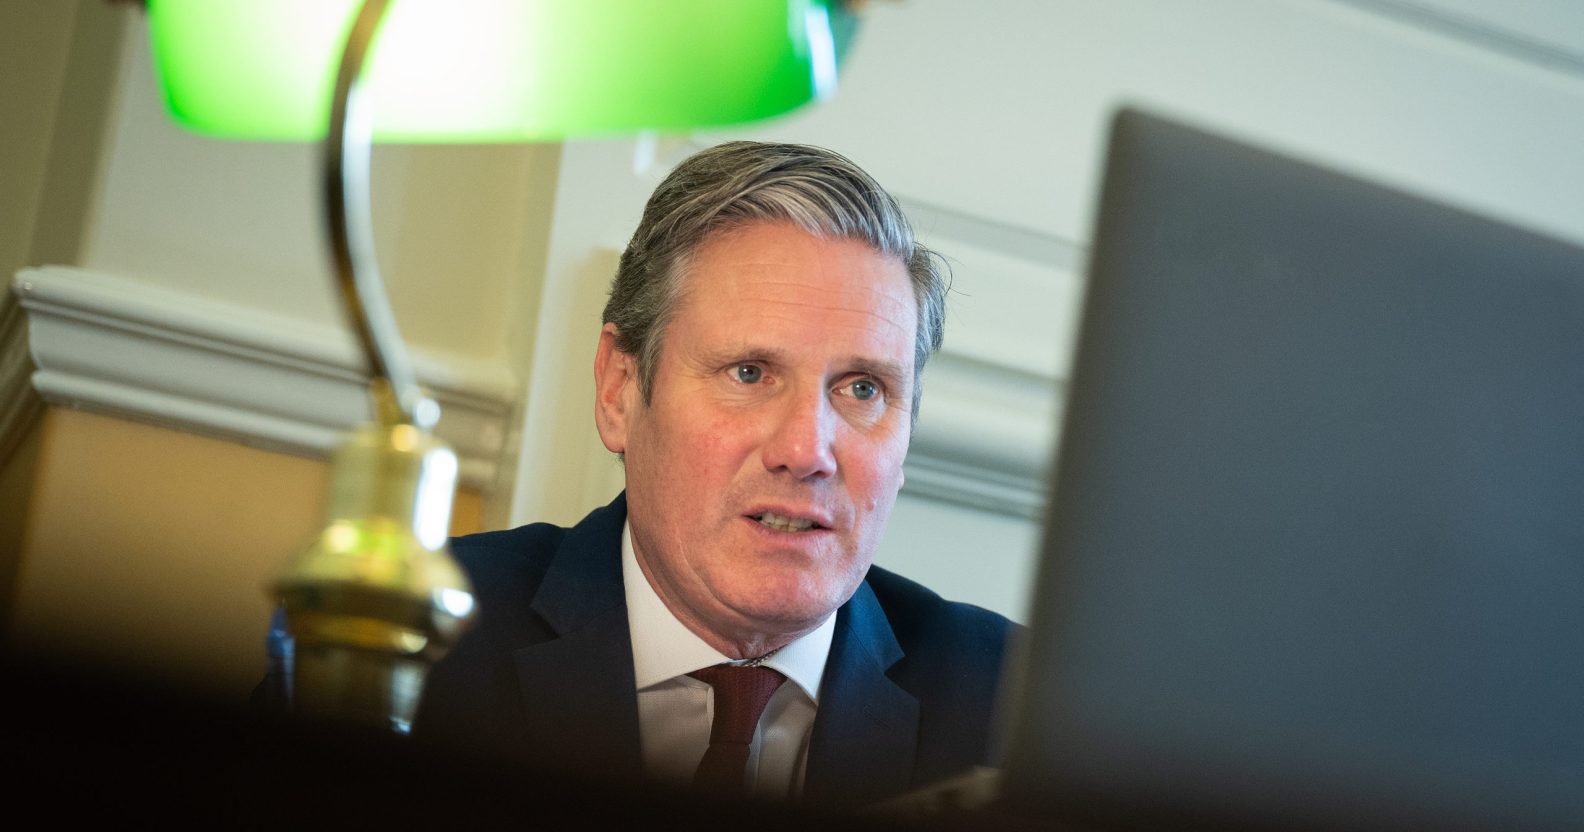 Keir Starmer's 'deafening silence' on trans rights slammed by activists